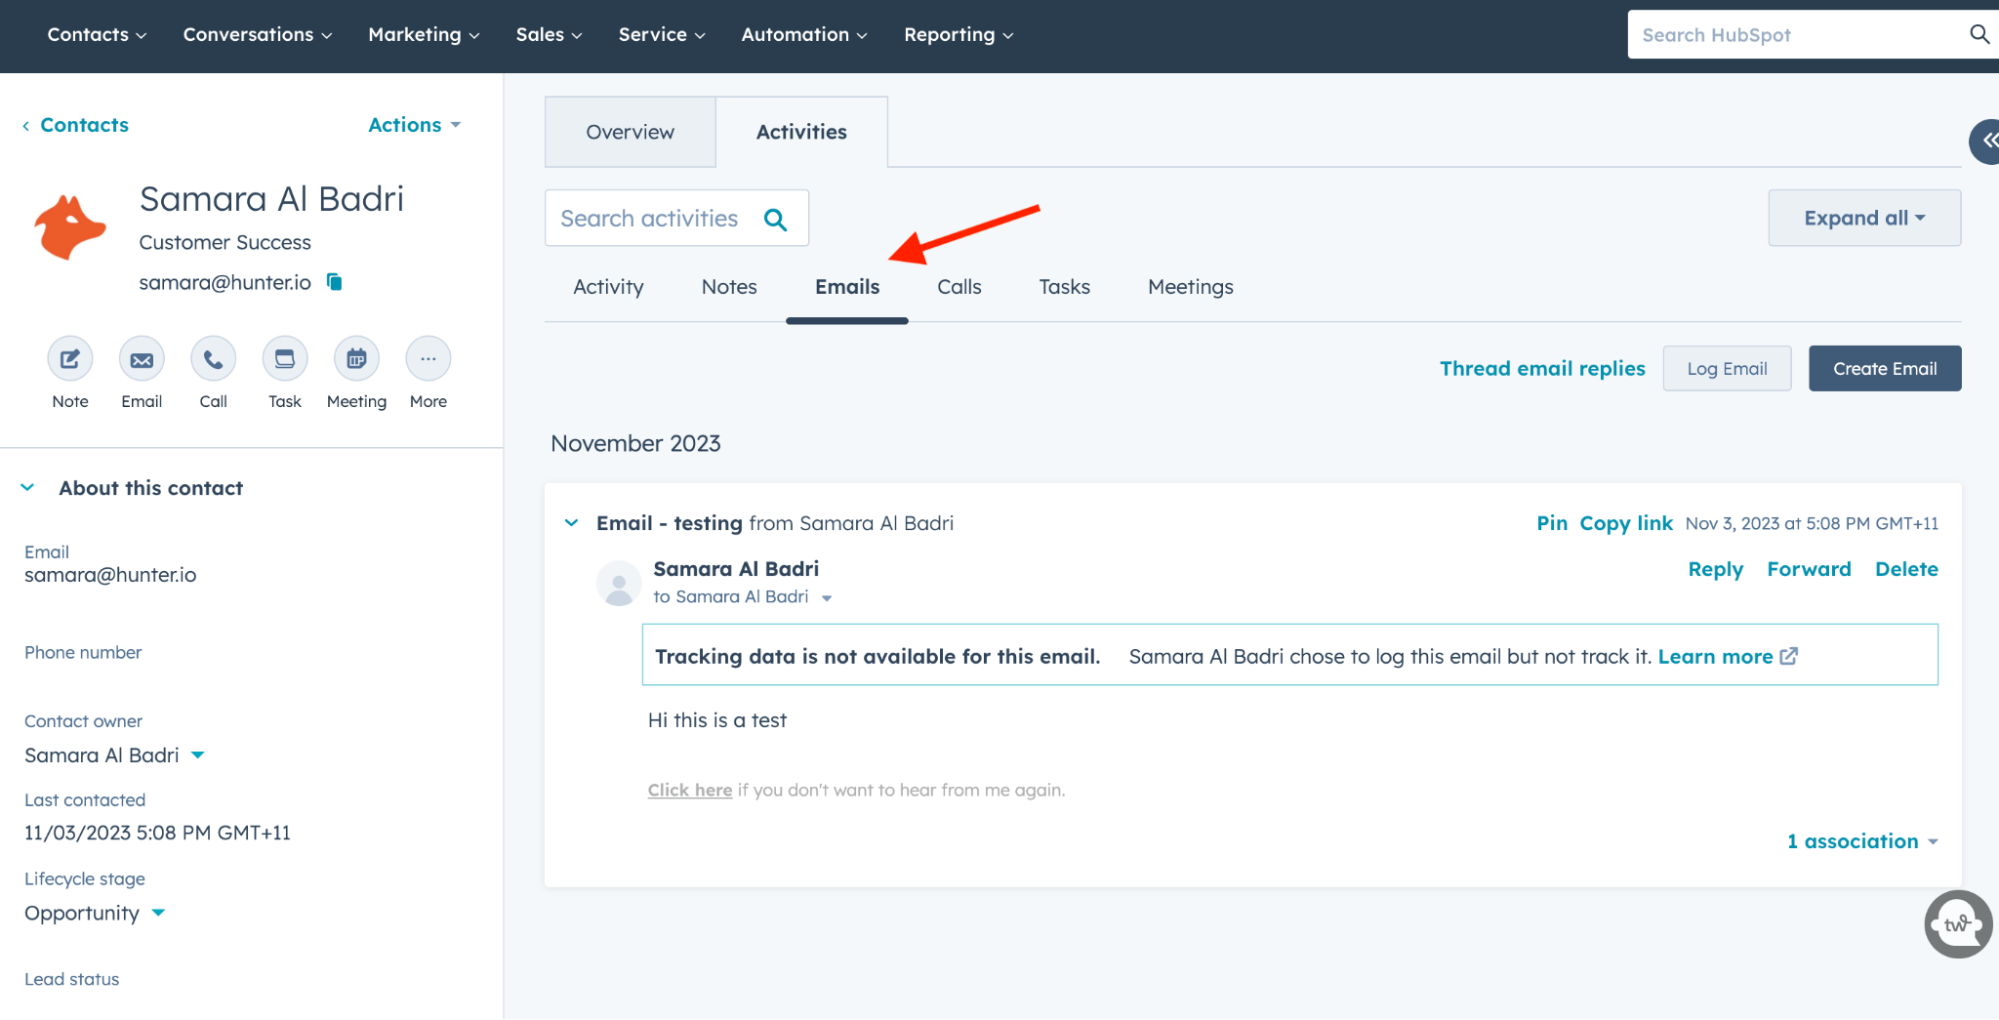 HubSpot interface showing emails synchronized from Hunter